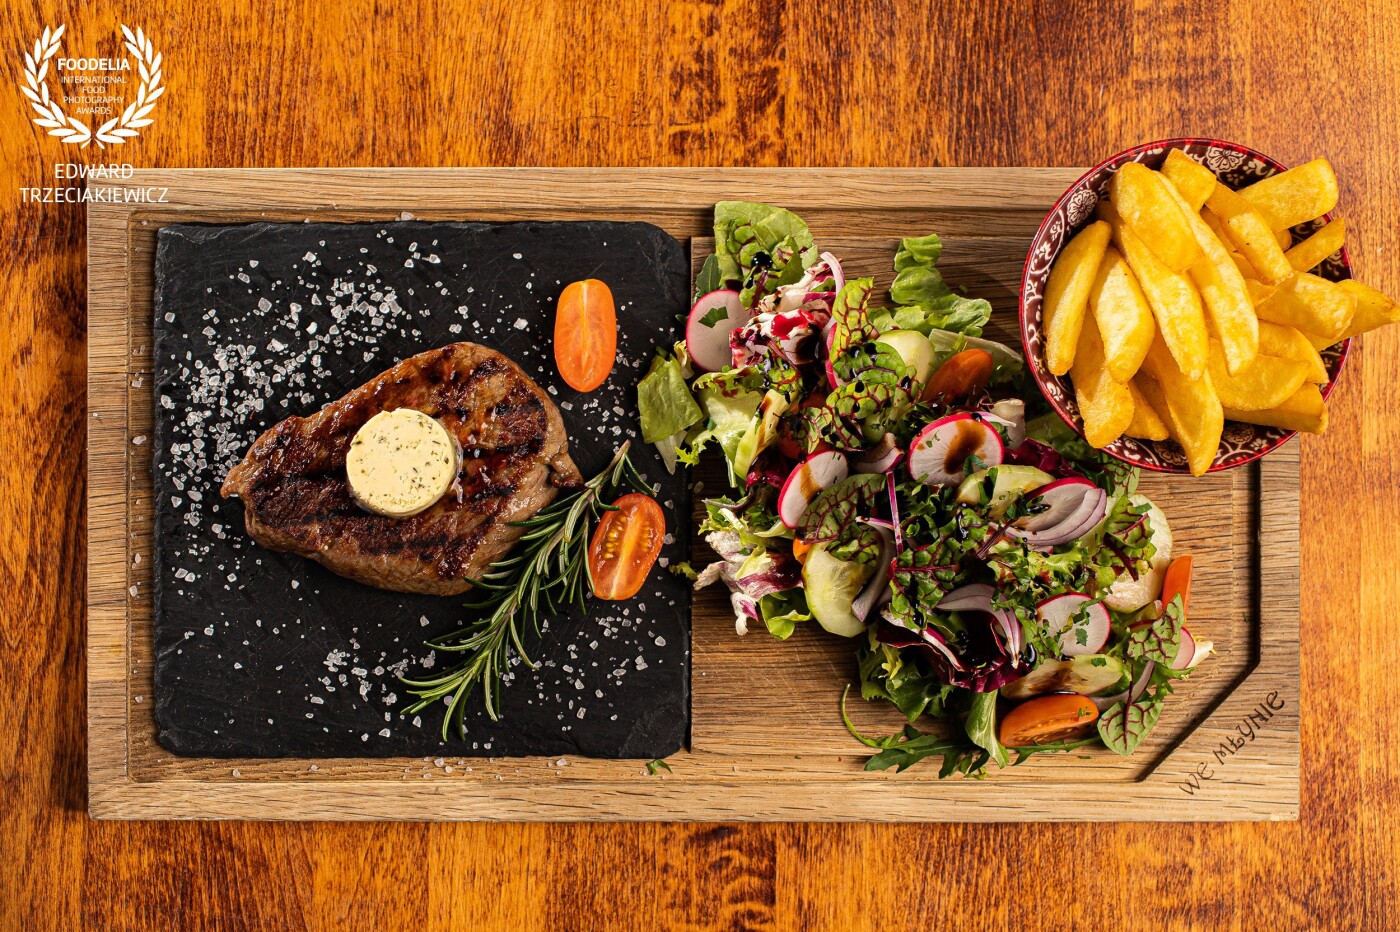 Angus beef steak served with pomegranate salad and Belgian fries in my favorite restaurant Anna Trzeciakiewicz Warmia and Masuria region  - "We Młynie" Warpuny @we.mlynie<br />
Canon 6D MkII / Canon 50mm 2.5 macro / iso 100 / 1/125sec